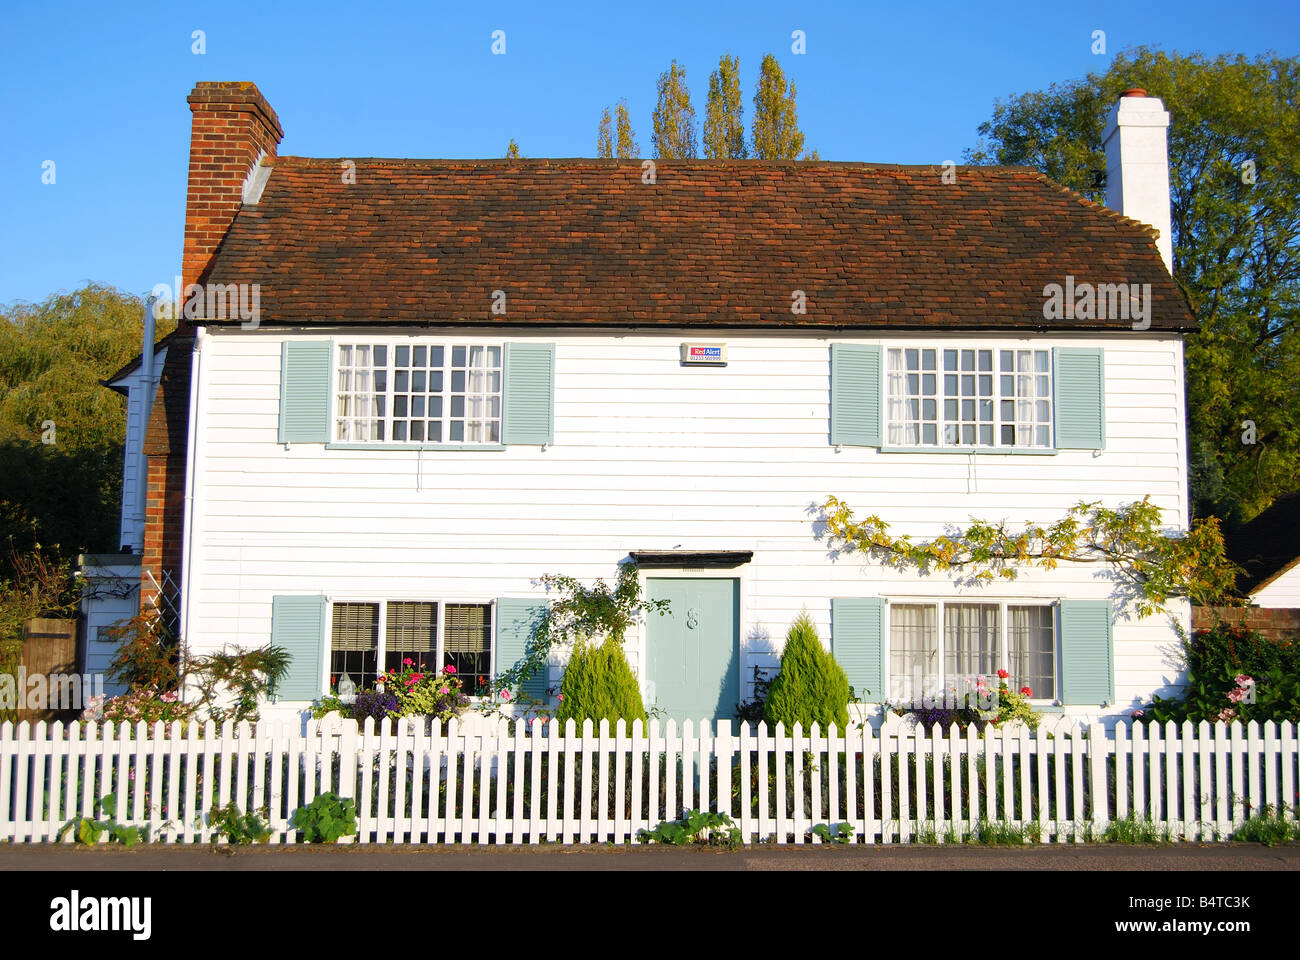 White, wooden house with picket fence, Biddenden, Kent, England, United Kingdom Stock Photo